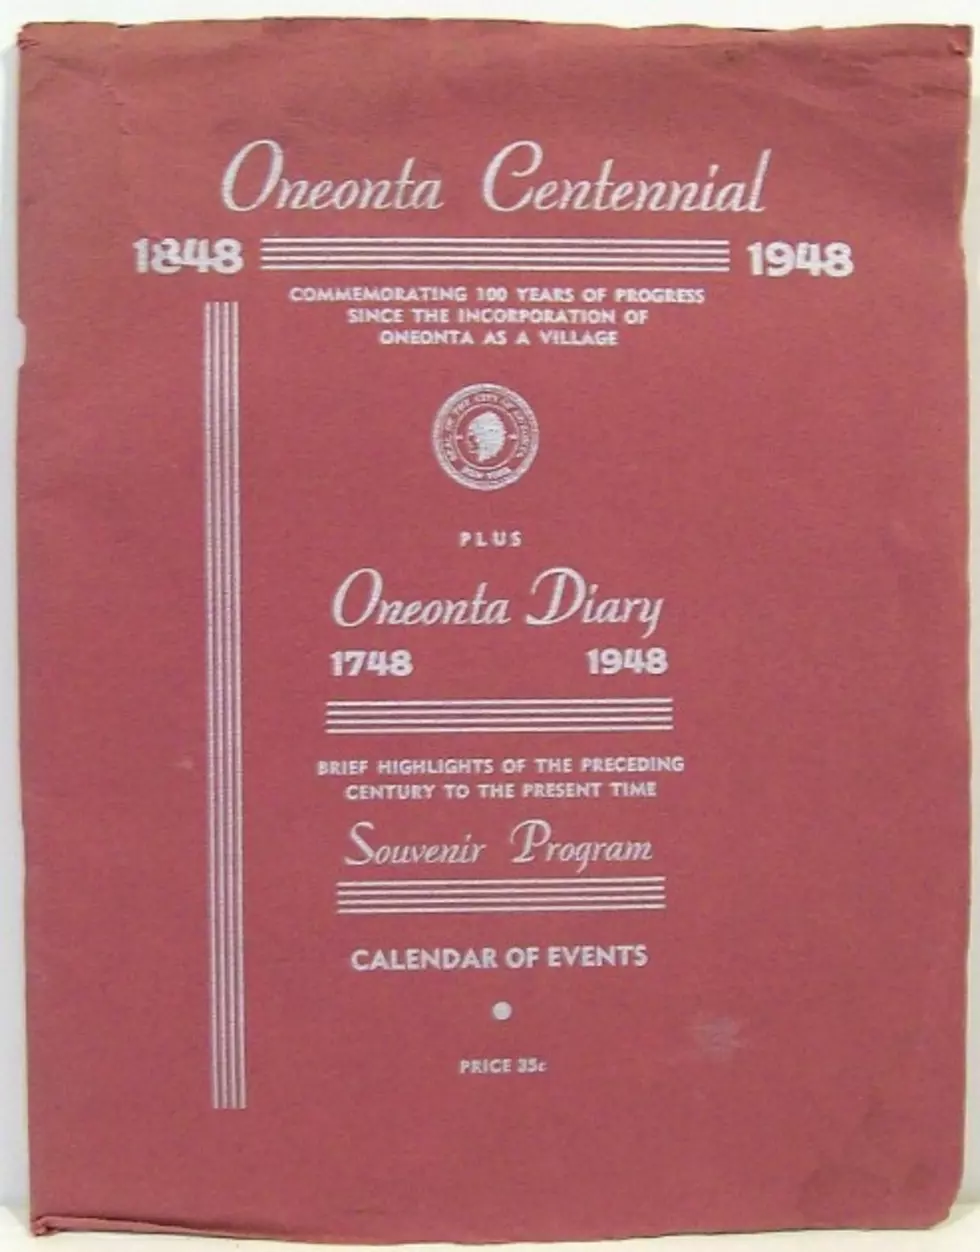 Big Chuck&#8217;s Monday Morning Time Capsule:  Oneonta Celebrates It&#8217;s Centennial in 1948!